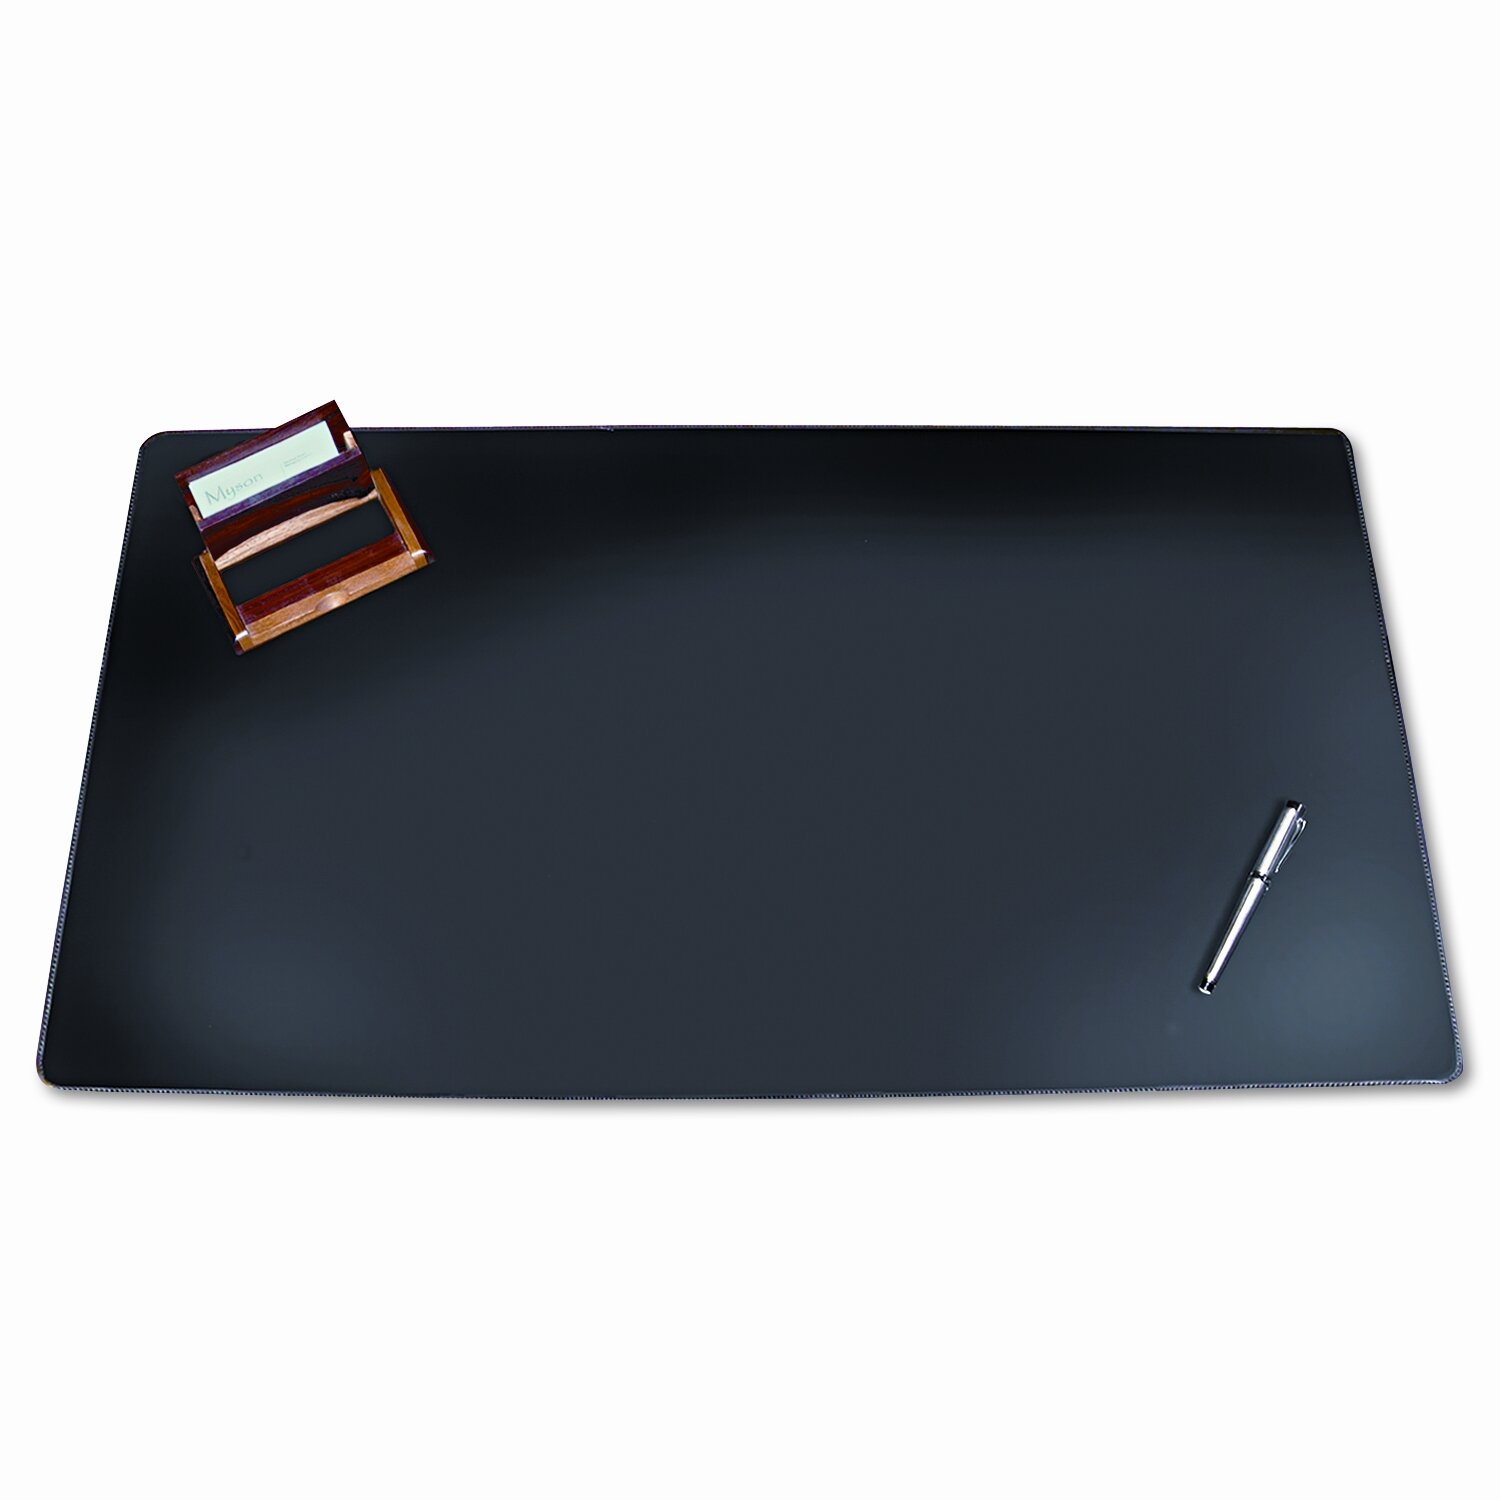 Artistic Llc Artistic Products Westfield Designer Desk Pad With